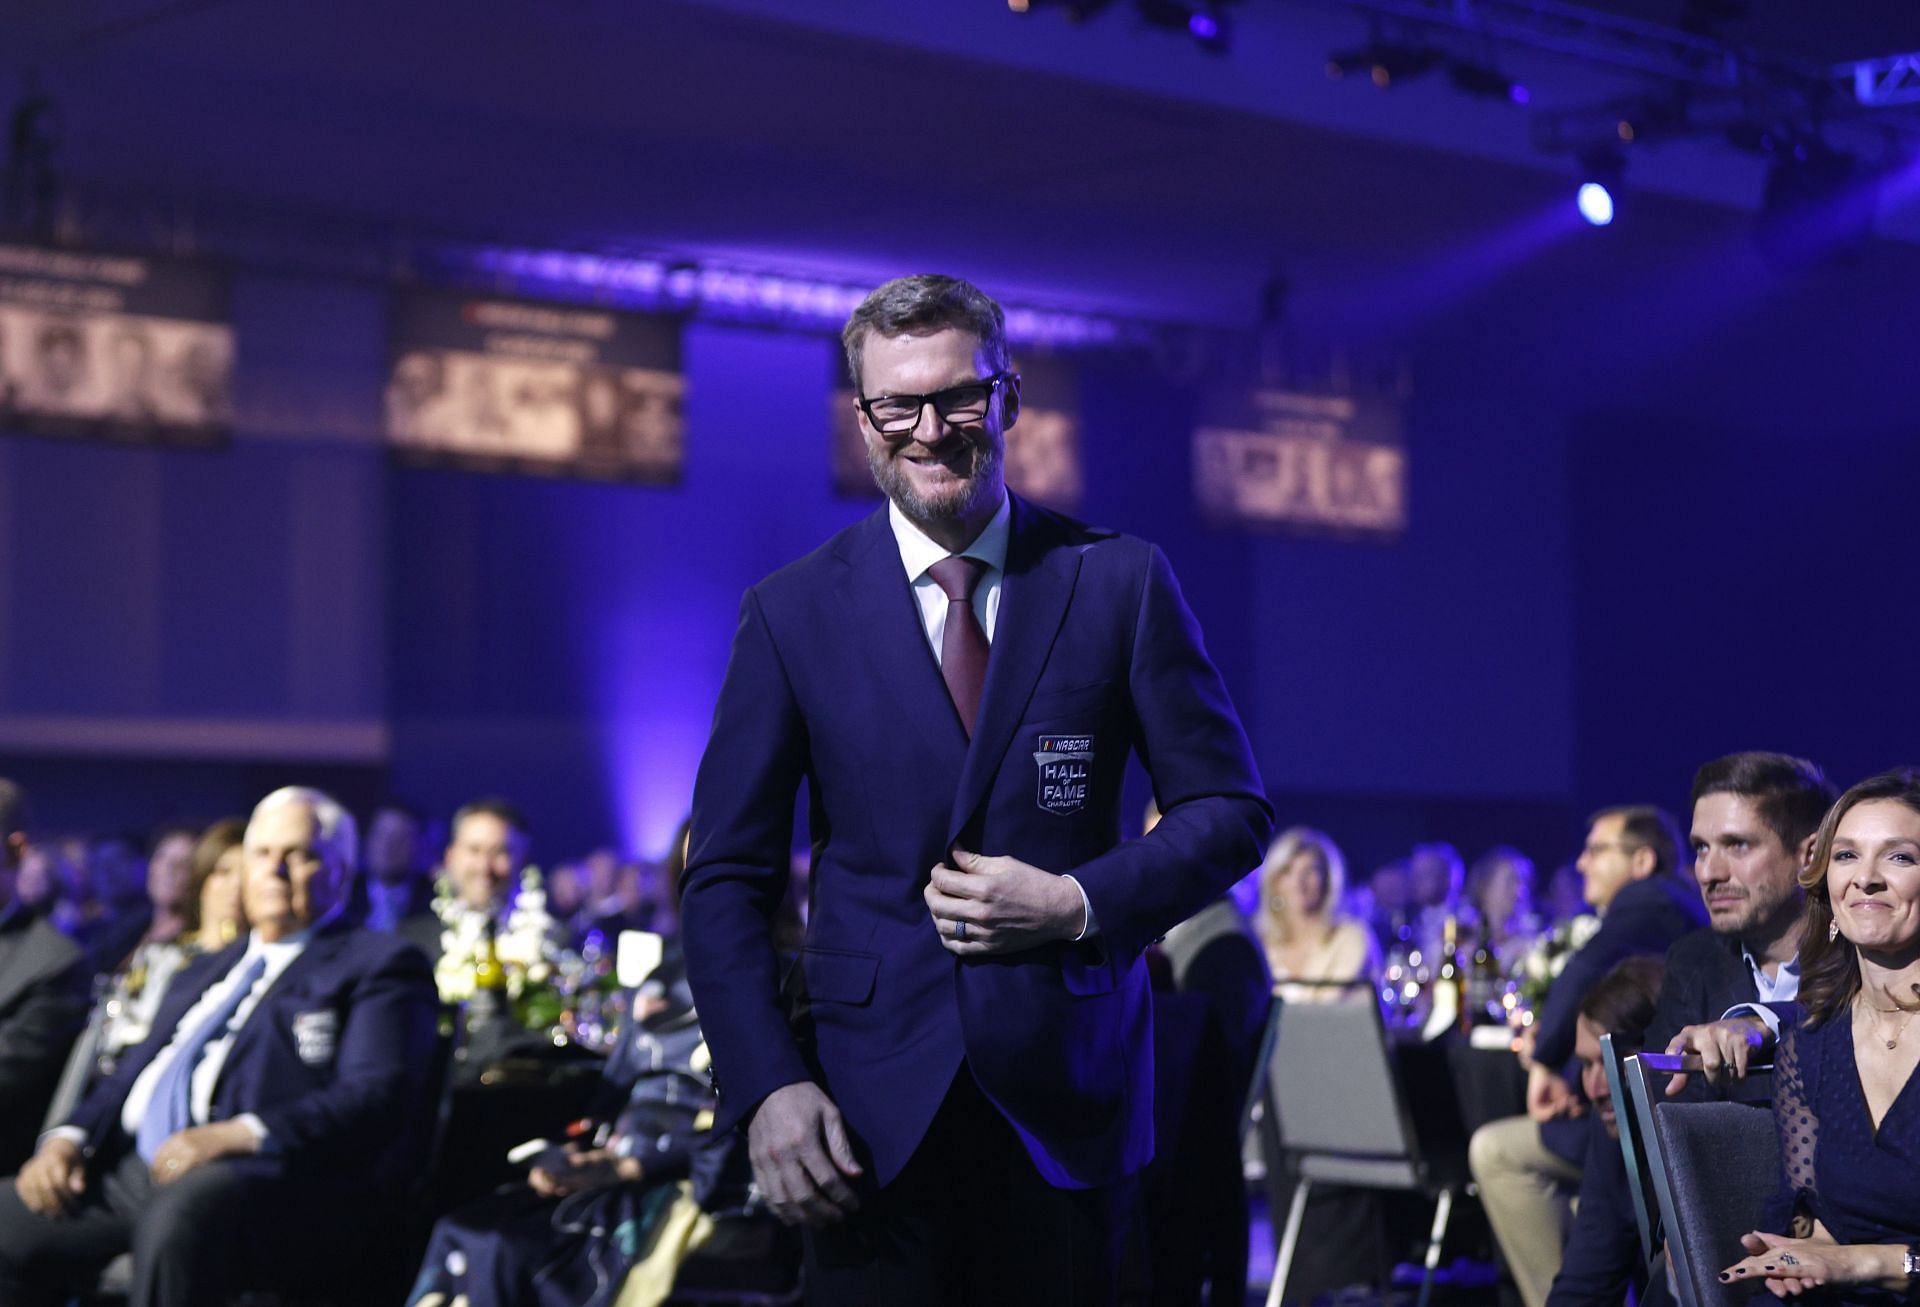 NASCAR Hall of Fame inductee Dale Earnhardt Jr. walks onto the stage during the induction ceremony